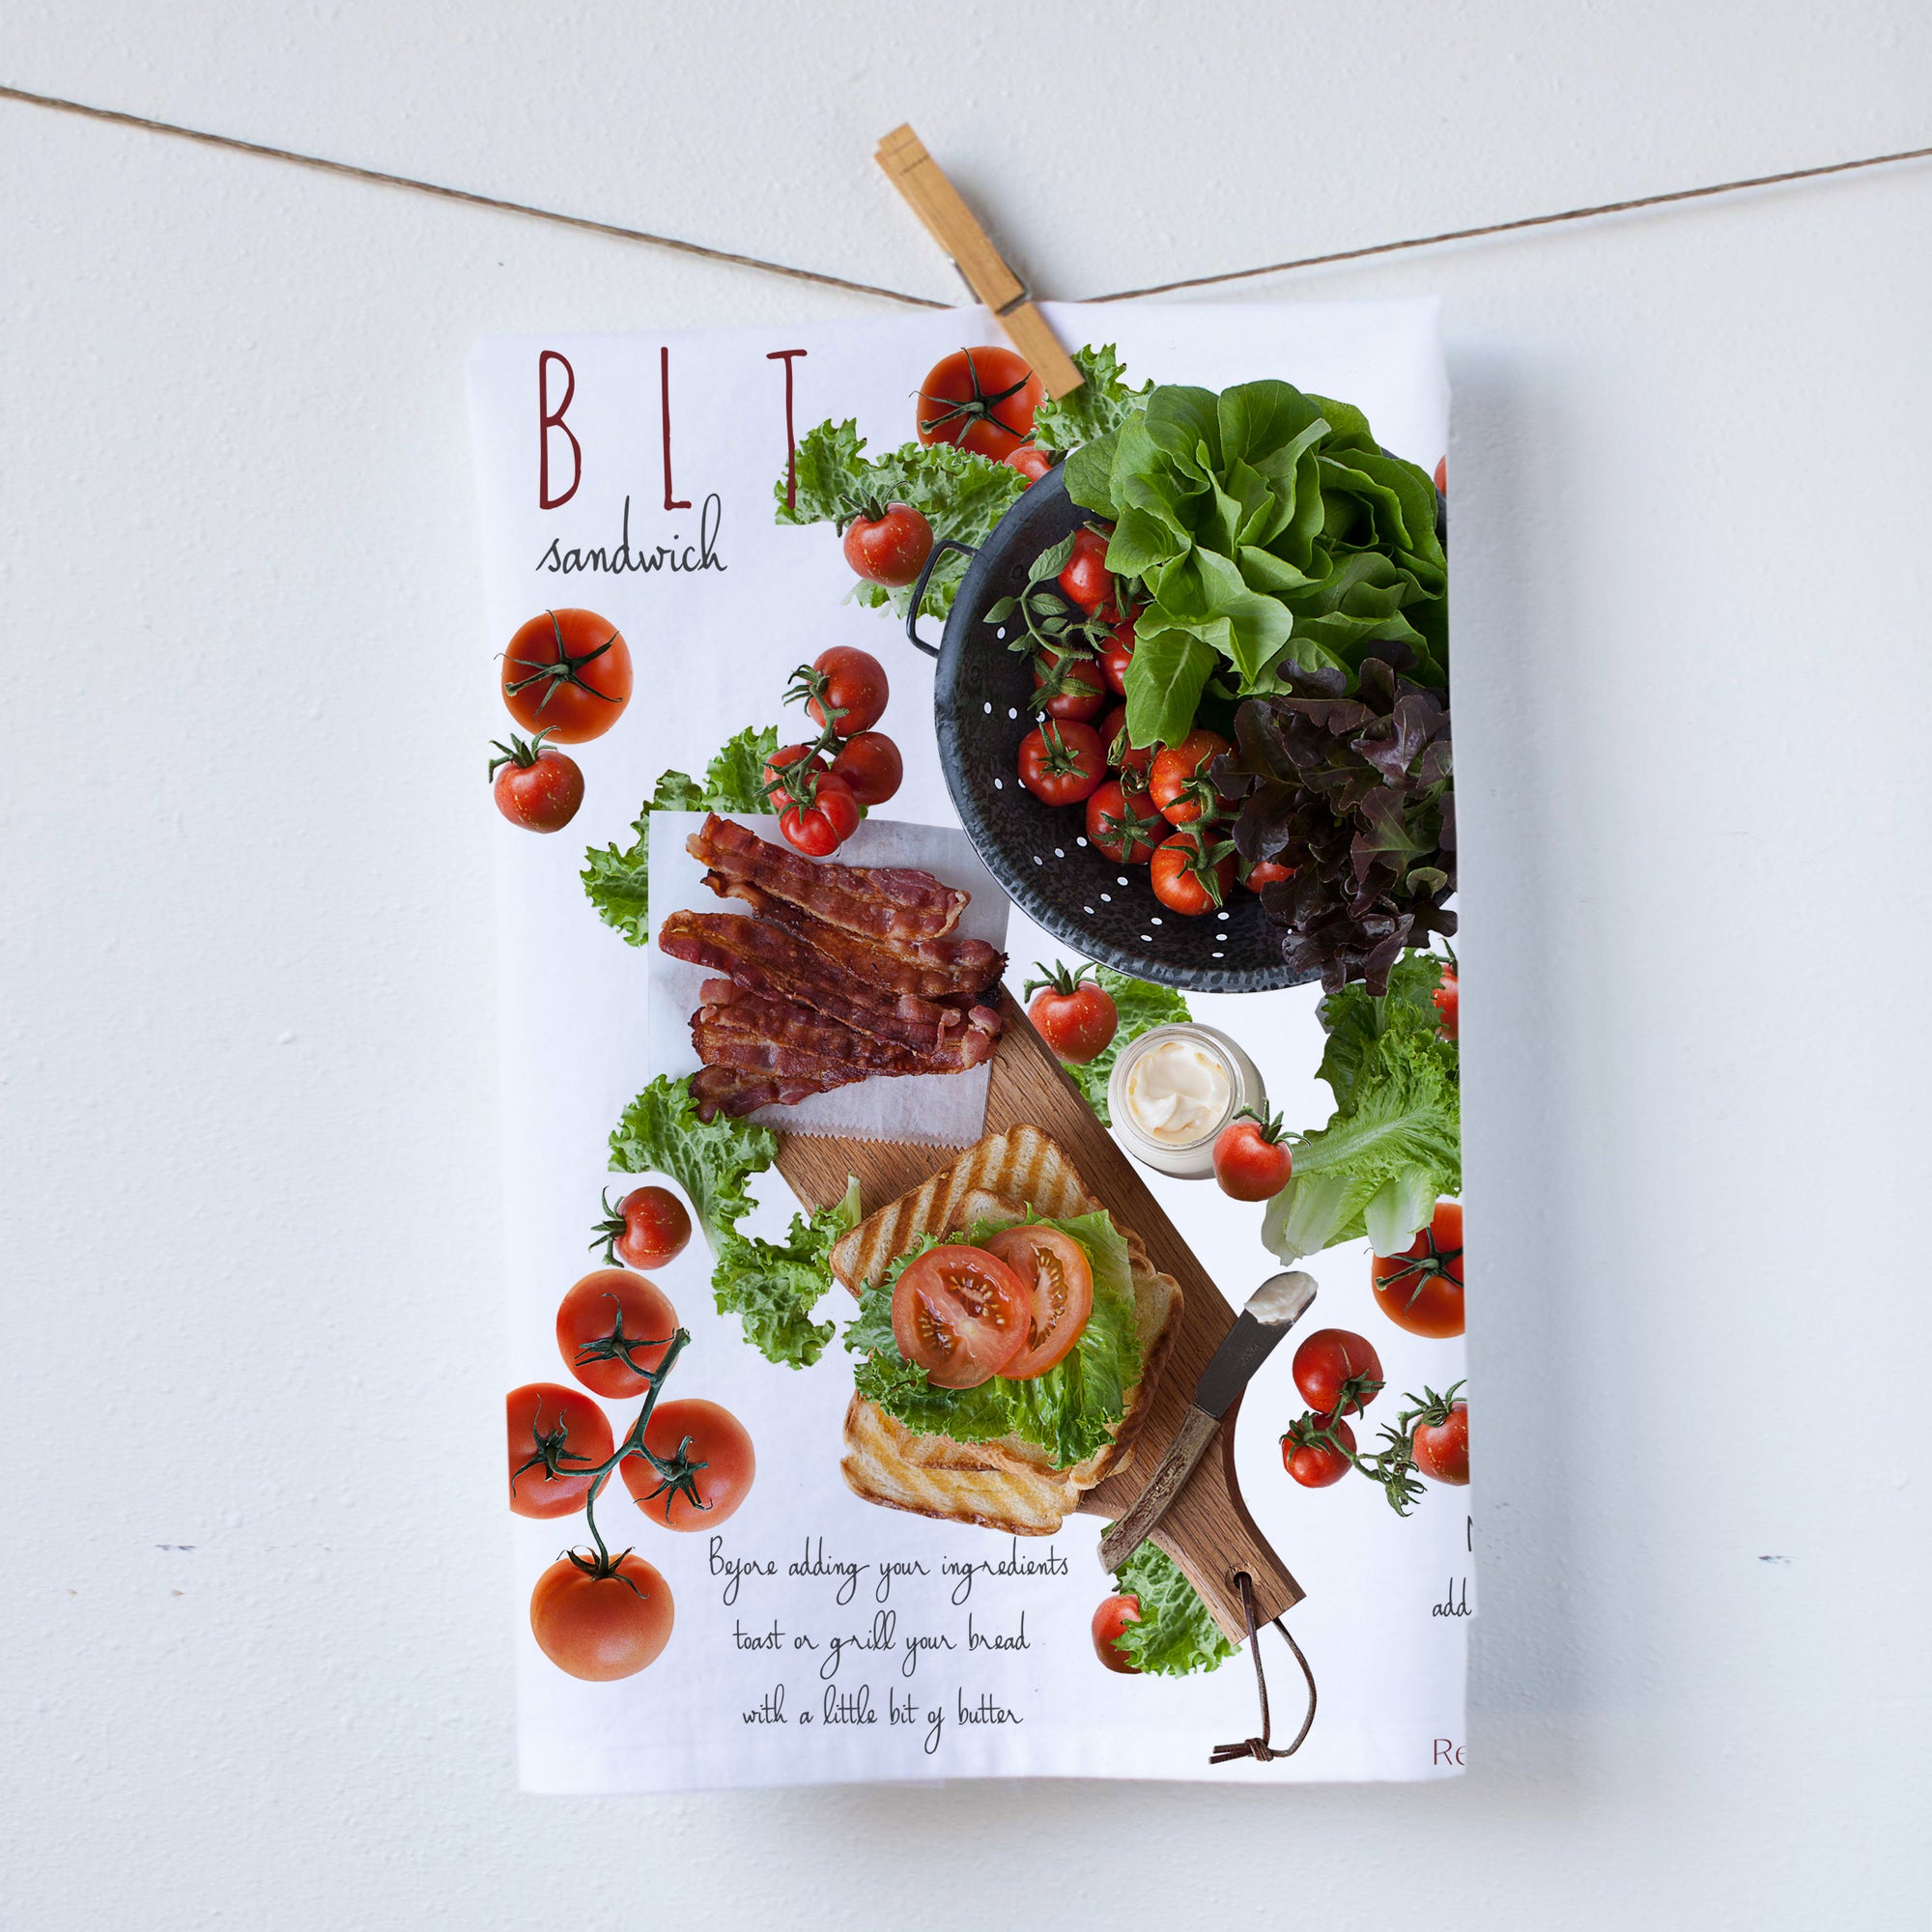 BLT recipe kitchen towel. Summer sandwich bacon lettuce and tomato. Food photography by Pauline Stevens . Hostess gift. 19 x 28   (2169388993)